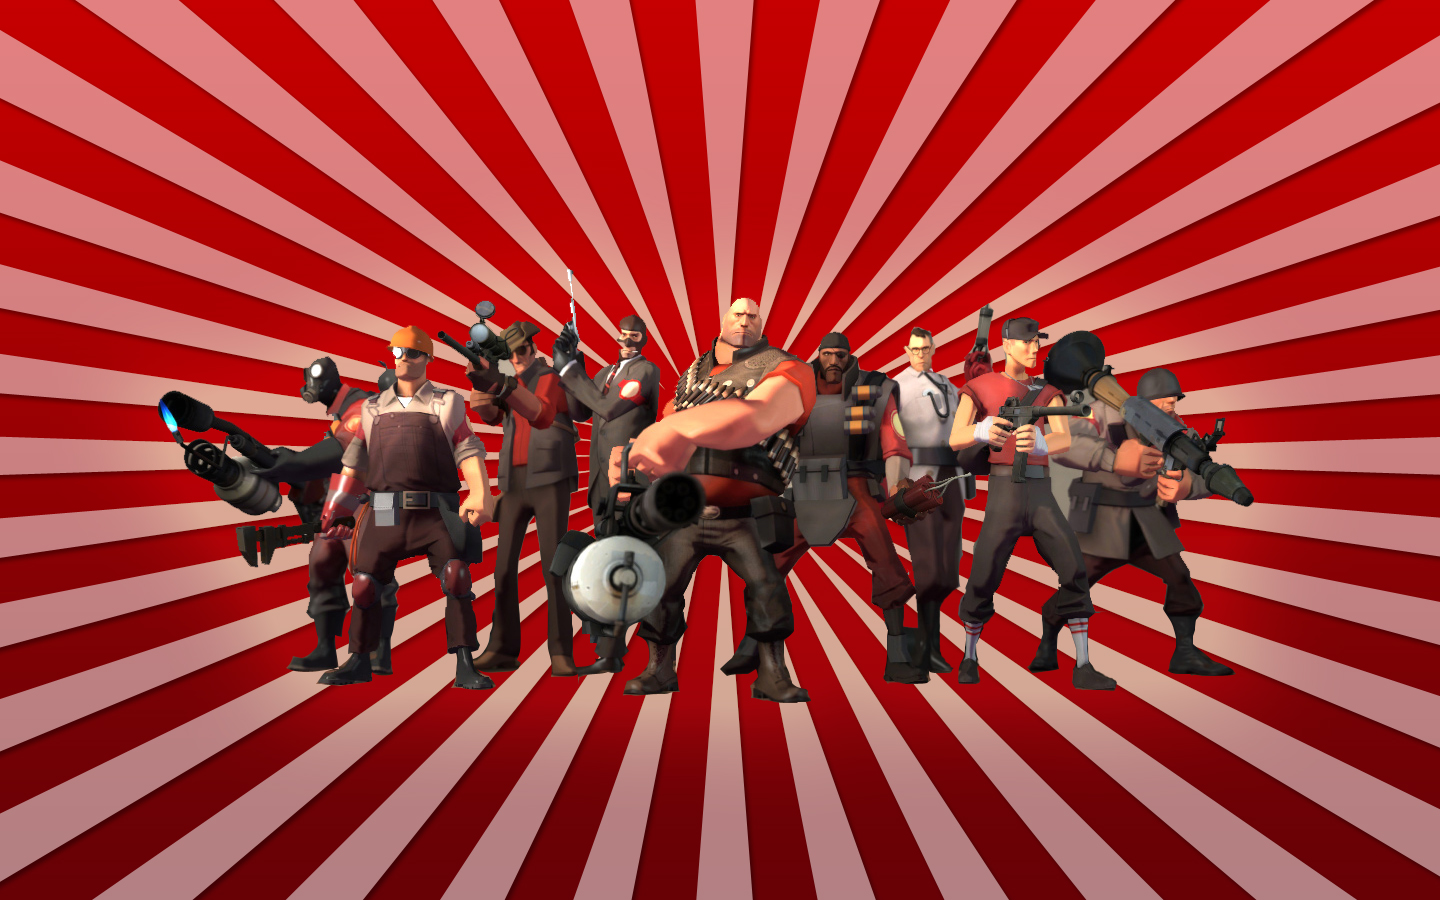 team fortress 2 download backgrounds